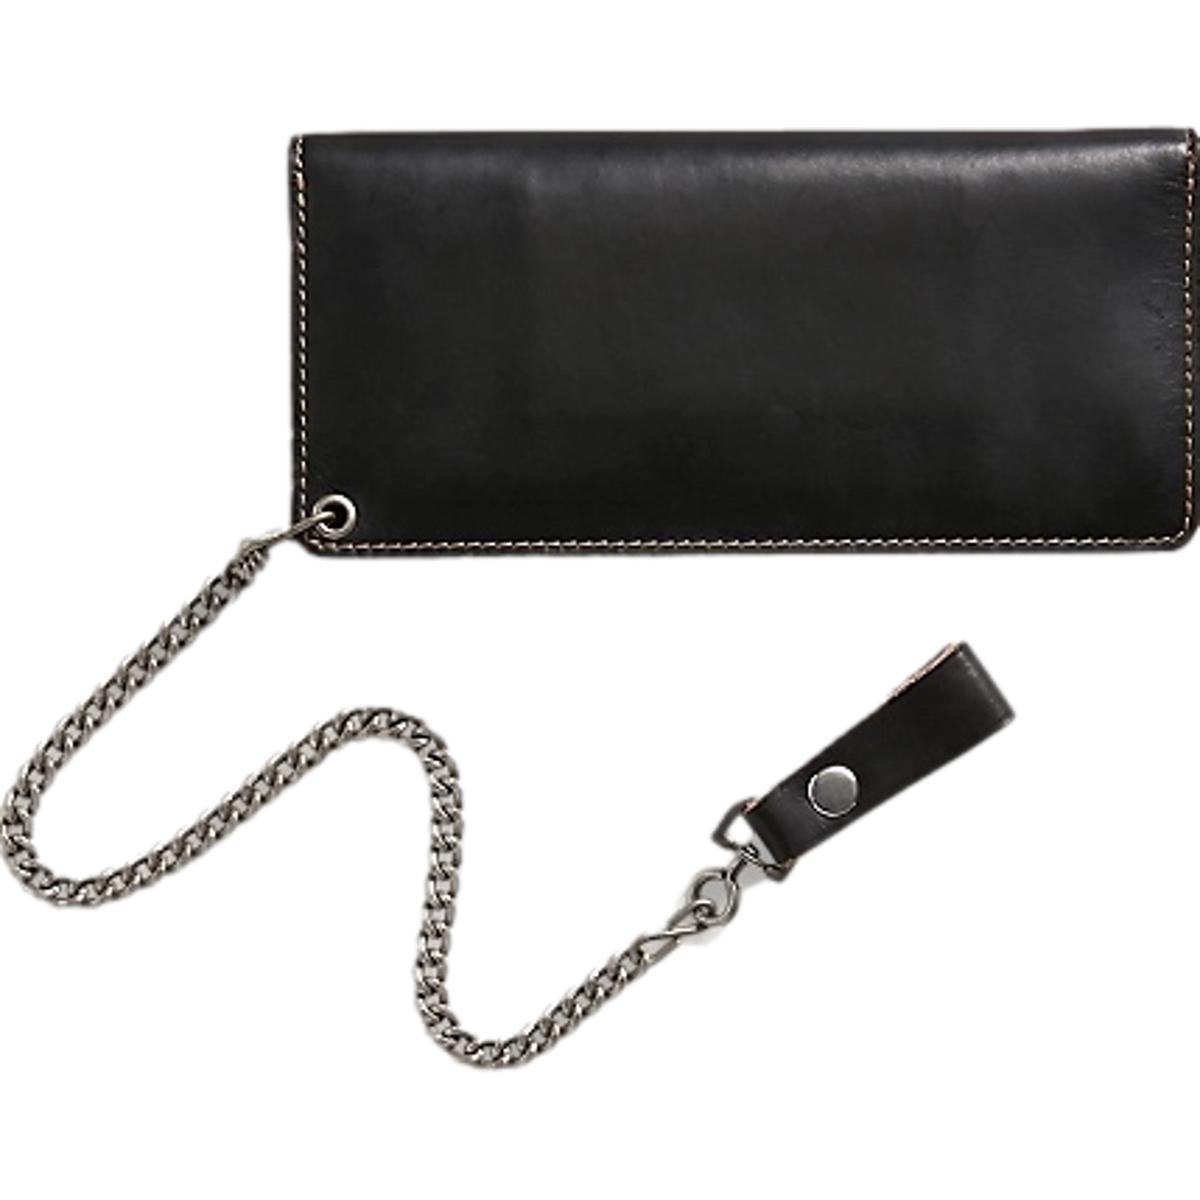 Leather Chain Wallet Black Over Brown - Wallet